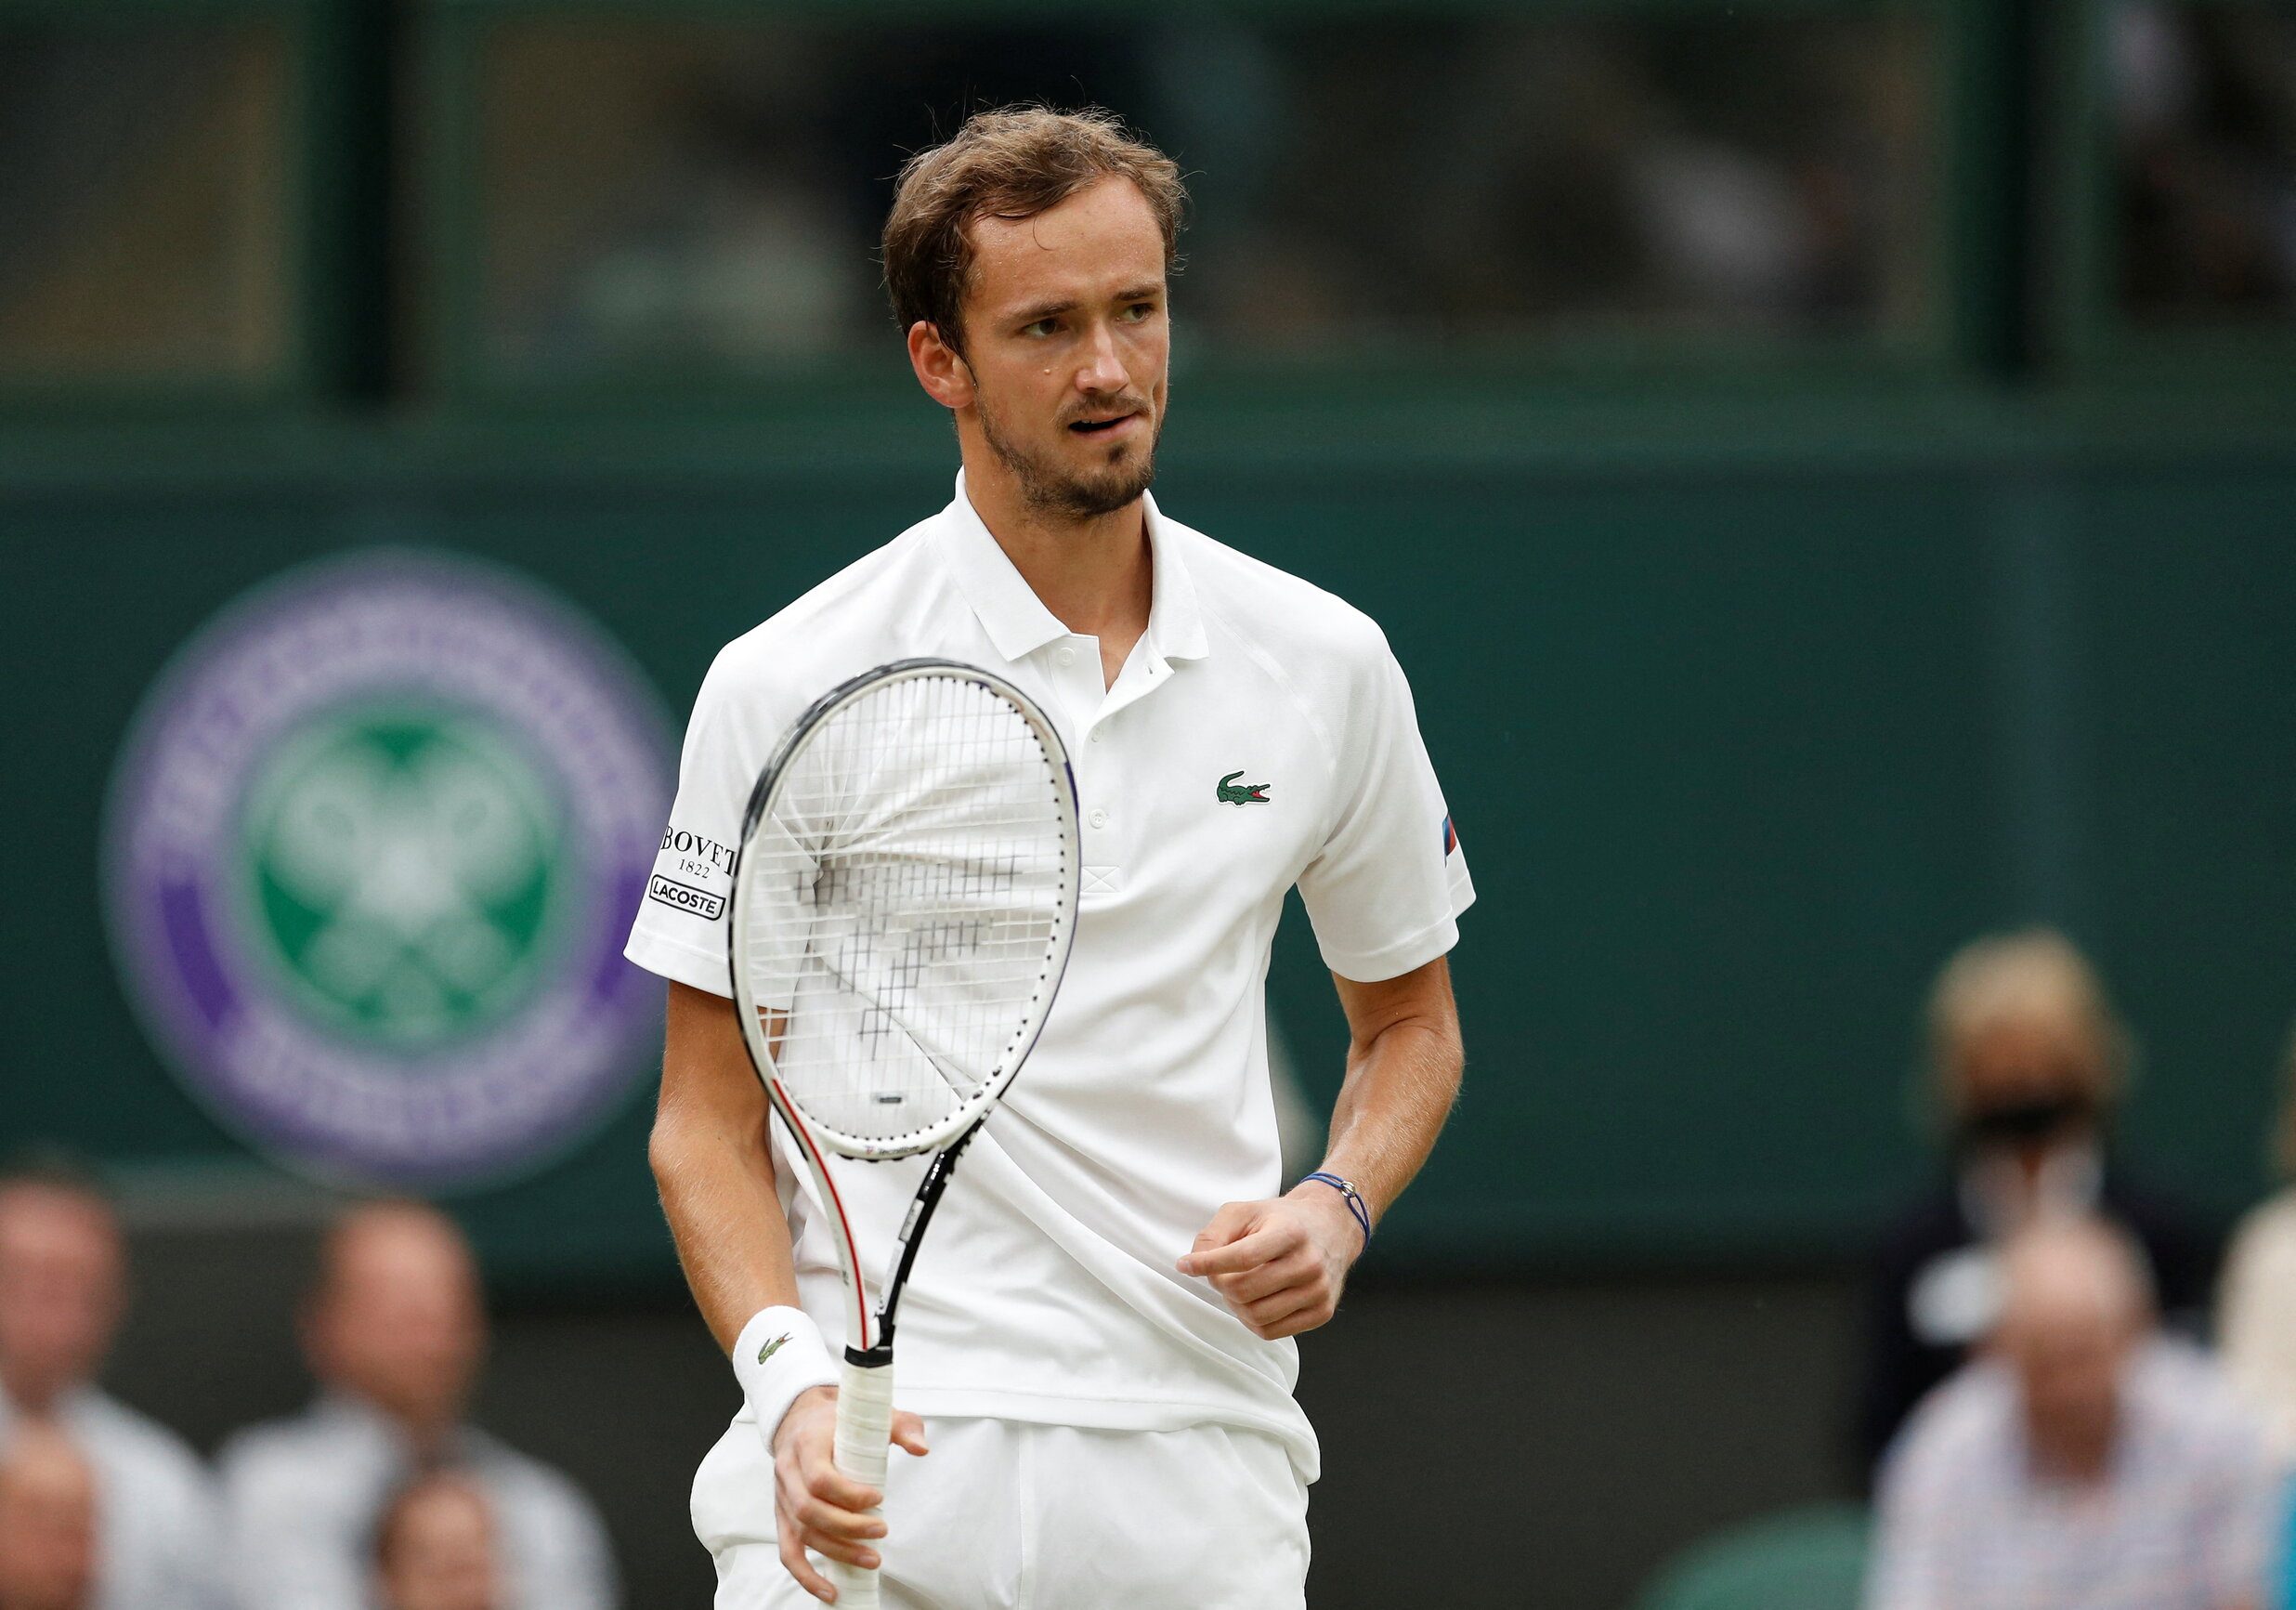 Wimbledon loses ranking points over Russia, Belarus ban